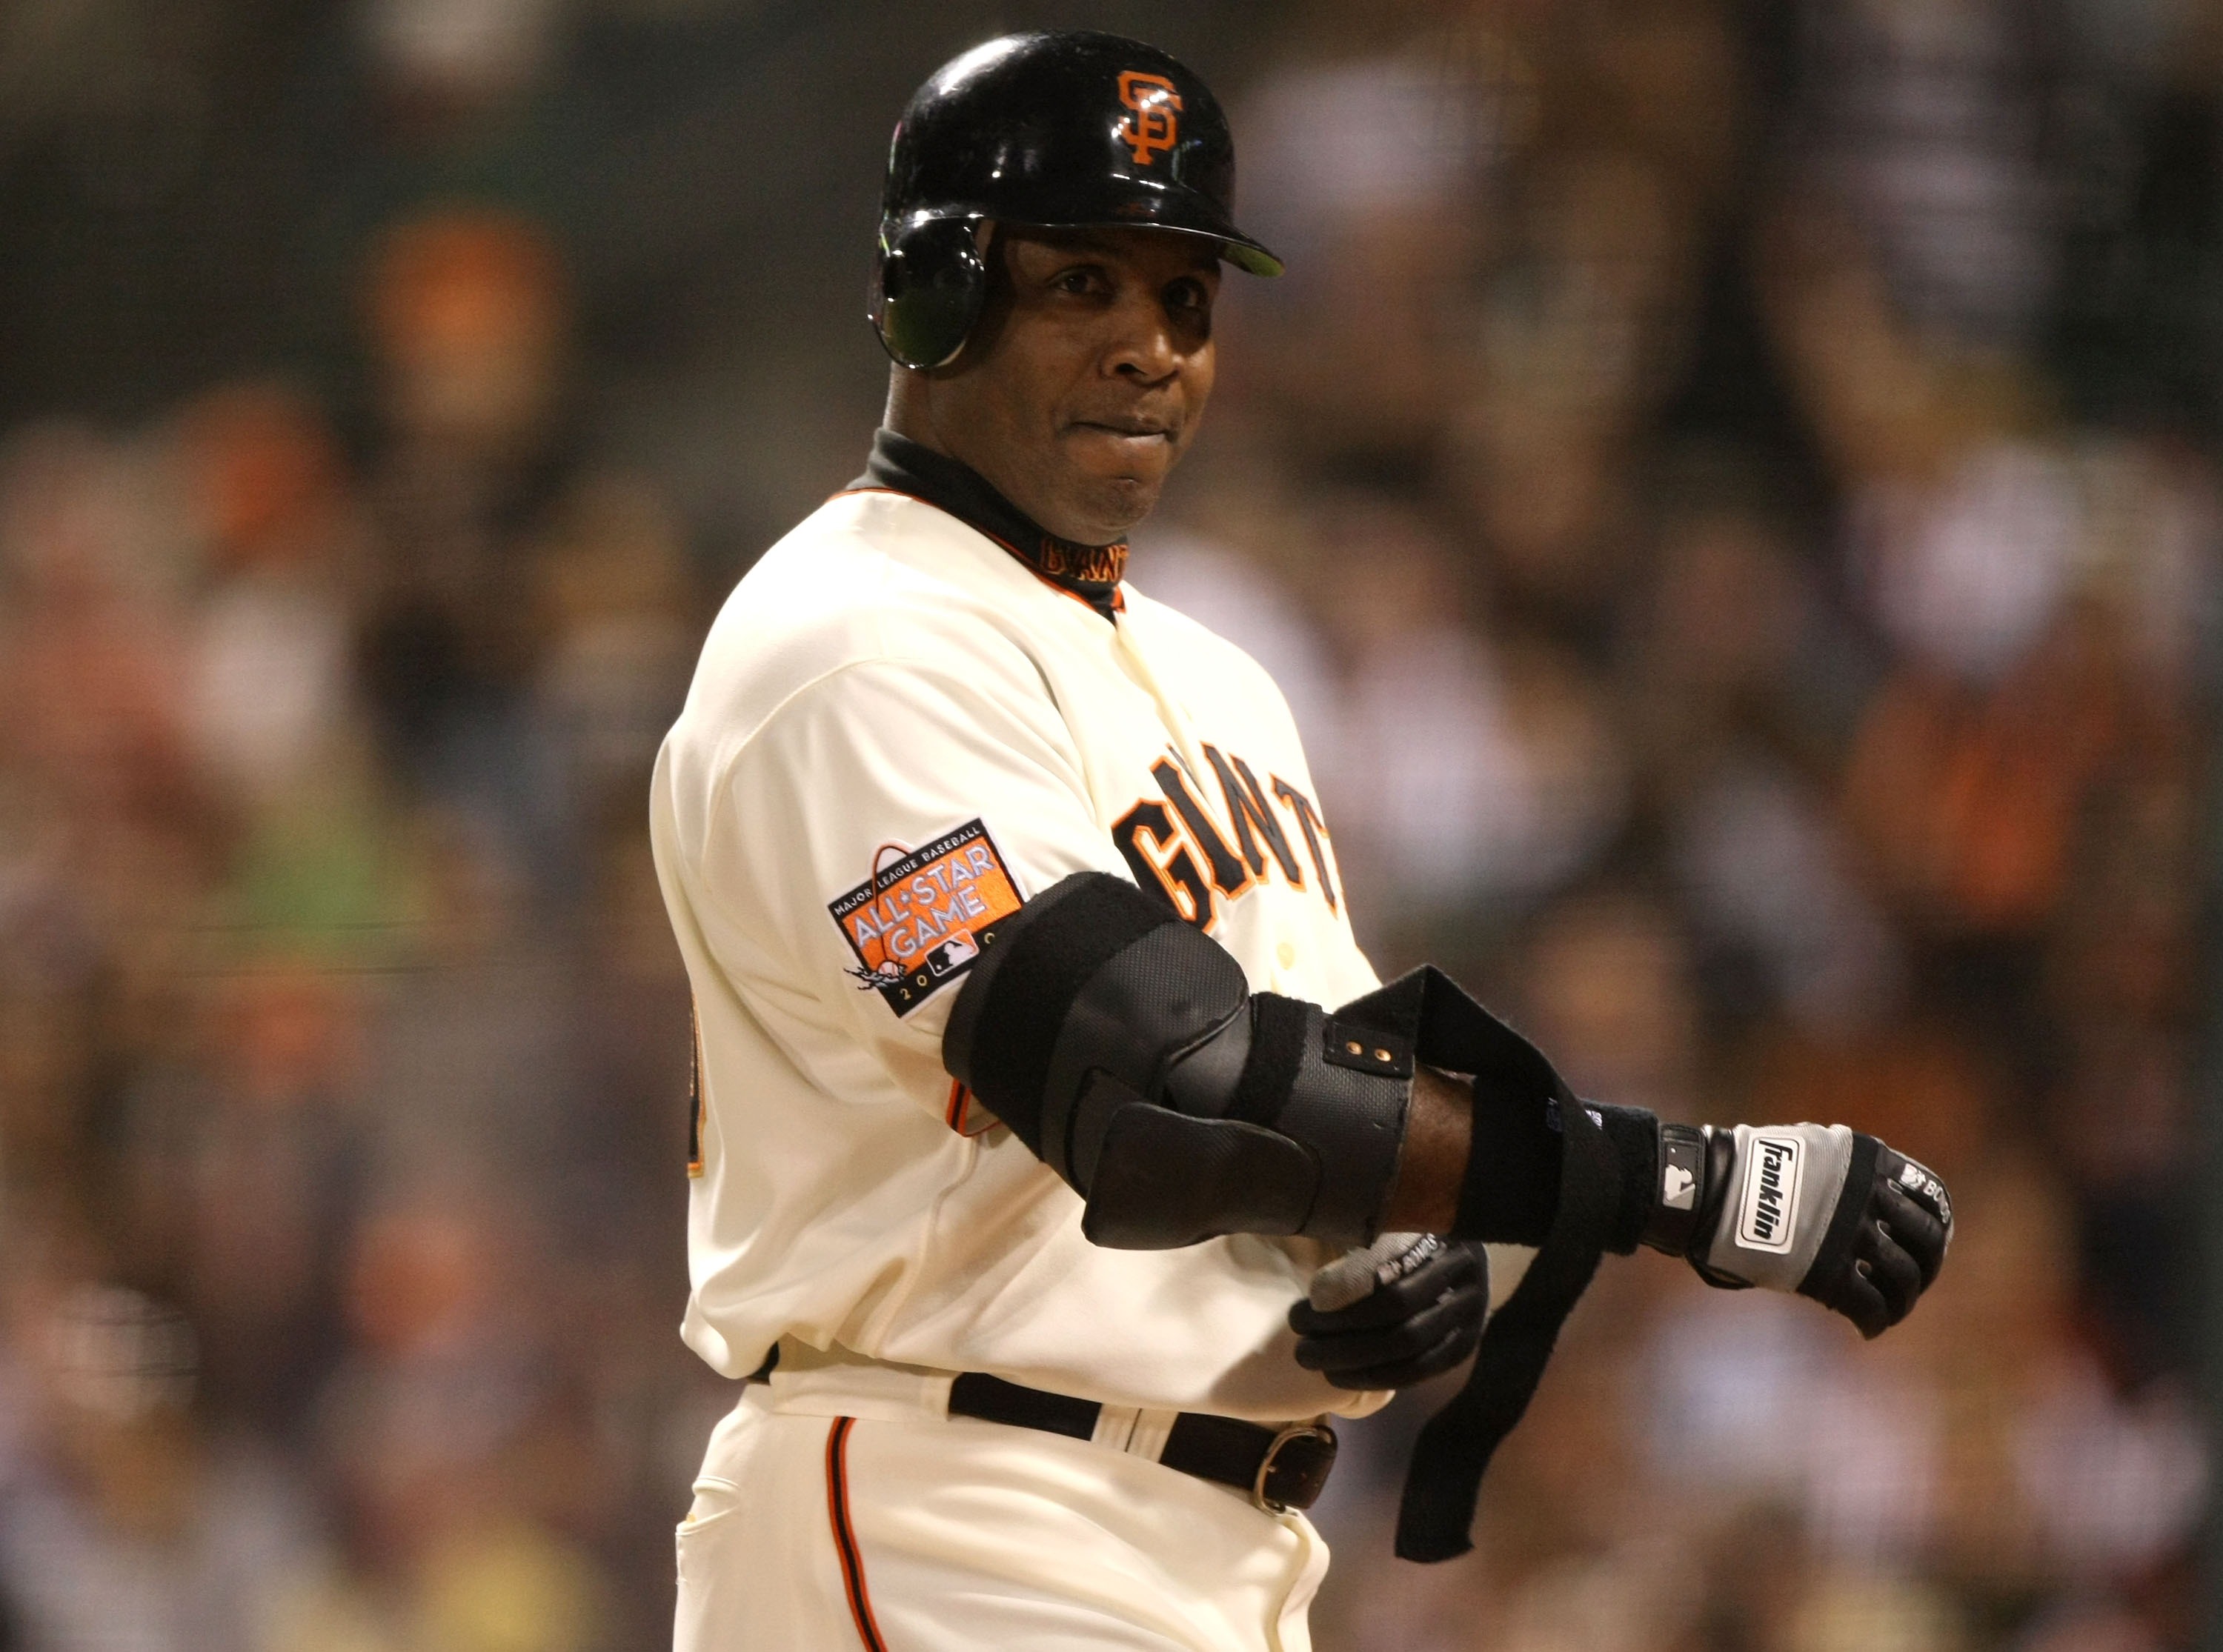 SAN FRANCISCO - SEPTEMBER 26:  Barry Bonds #25 of the San Francisco Giants looks on during his game against the San Diego Padres during a Major League Baseball game on September 26, 2007 at AT&T Park in San Francisco, California.  (Photo by Jed Jacobsohn/